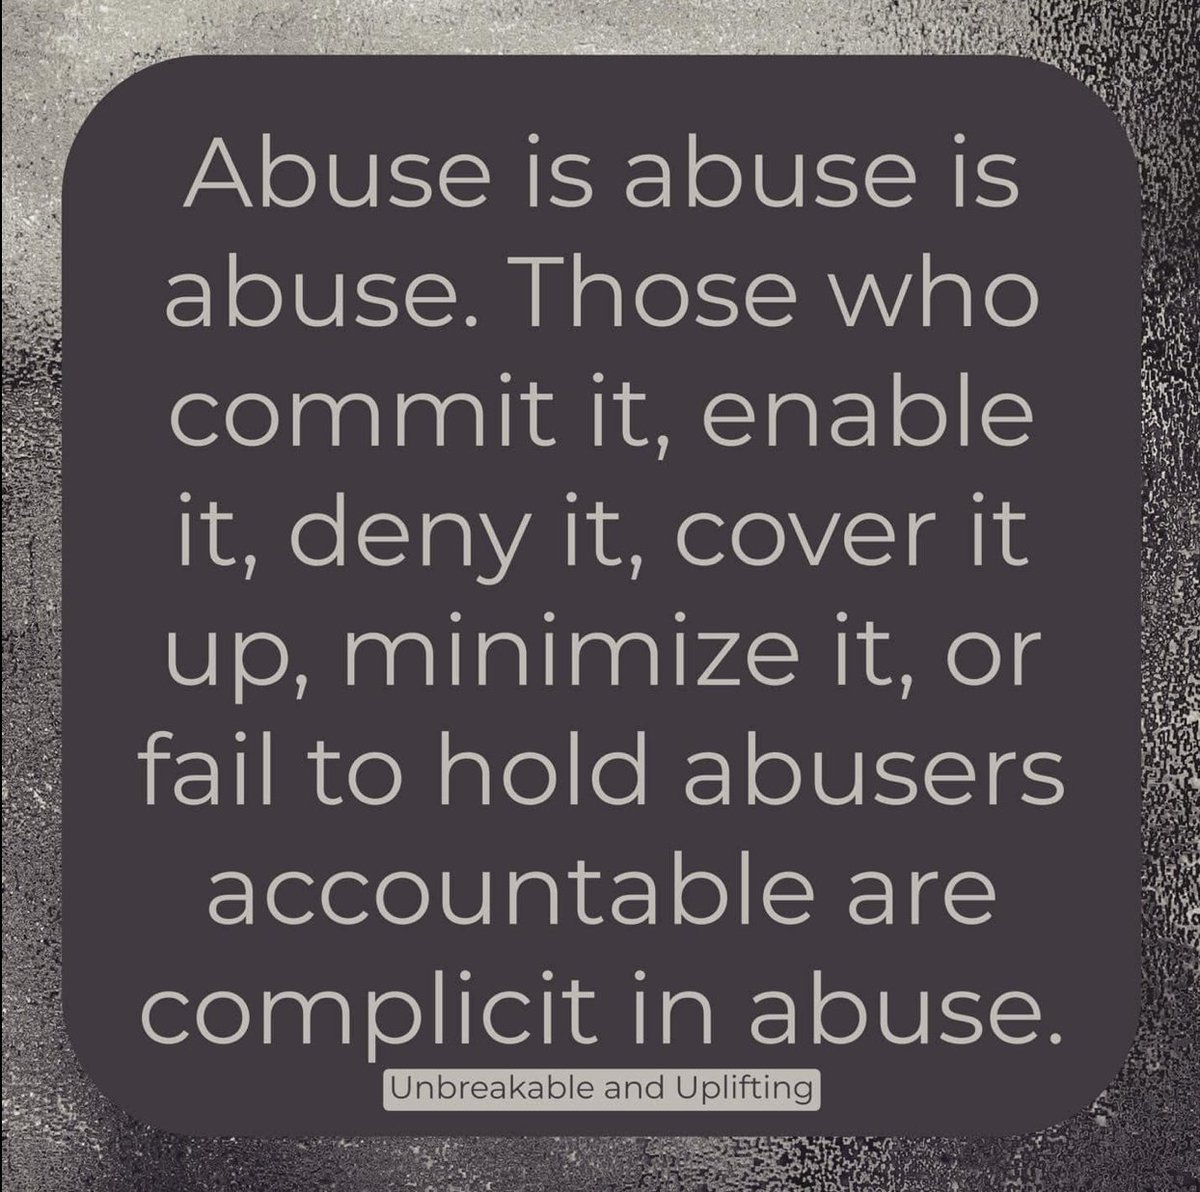 #NicolaBulley 
..let's include police who refuse to investigate red-flags of abuse & professionals/authorities who stay silent.

Enough of this elephant in the room!

#DomesticAbuse #InstitutionalAbuse